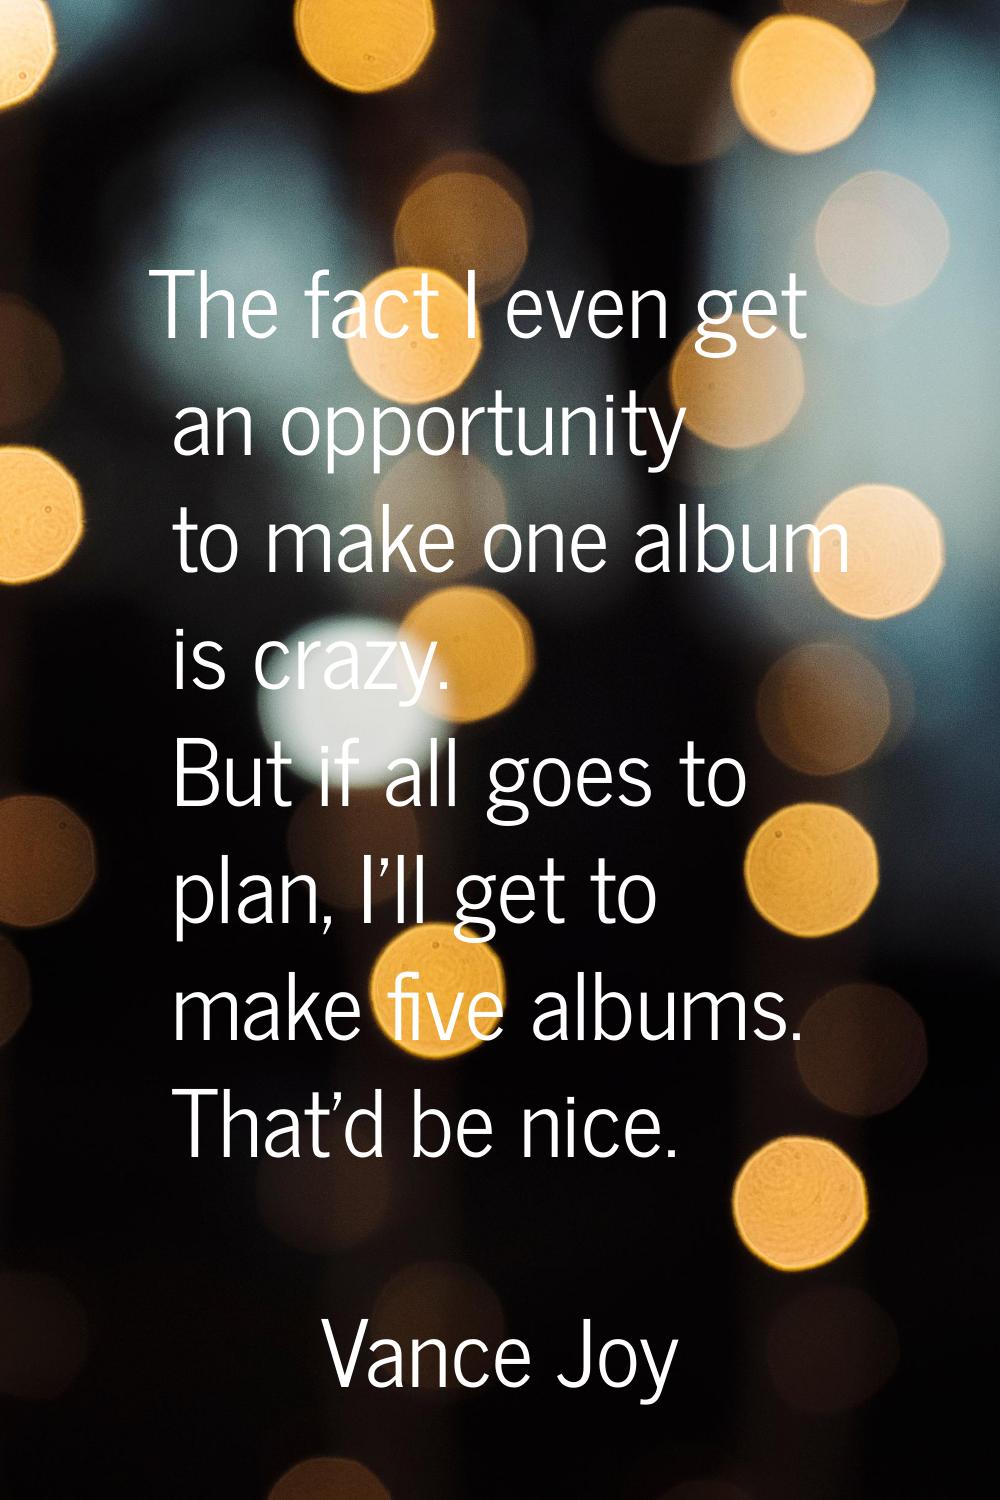 The fact I even get an opportunity to make one album is crazy. But if all goes to plan, I'll get to